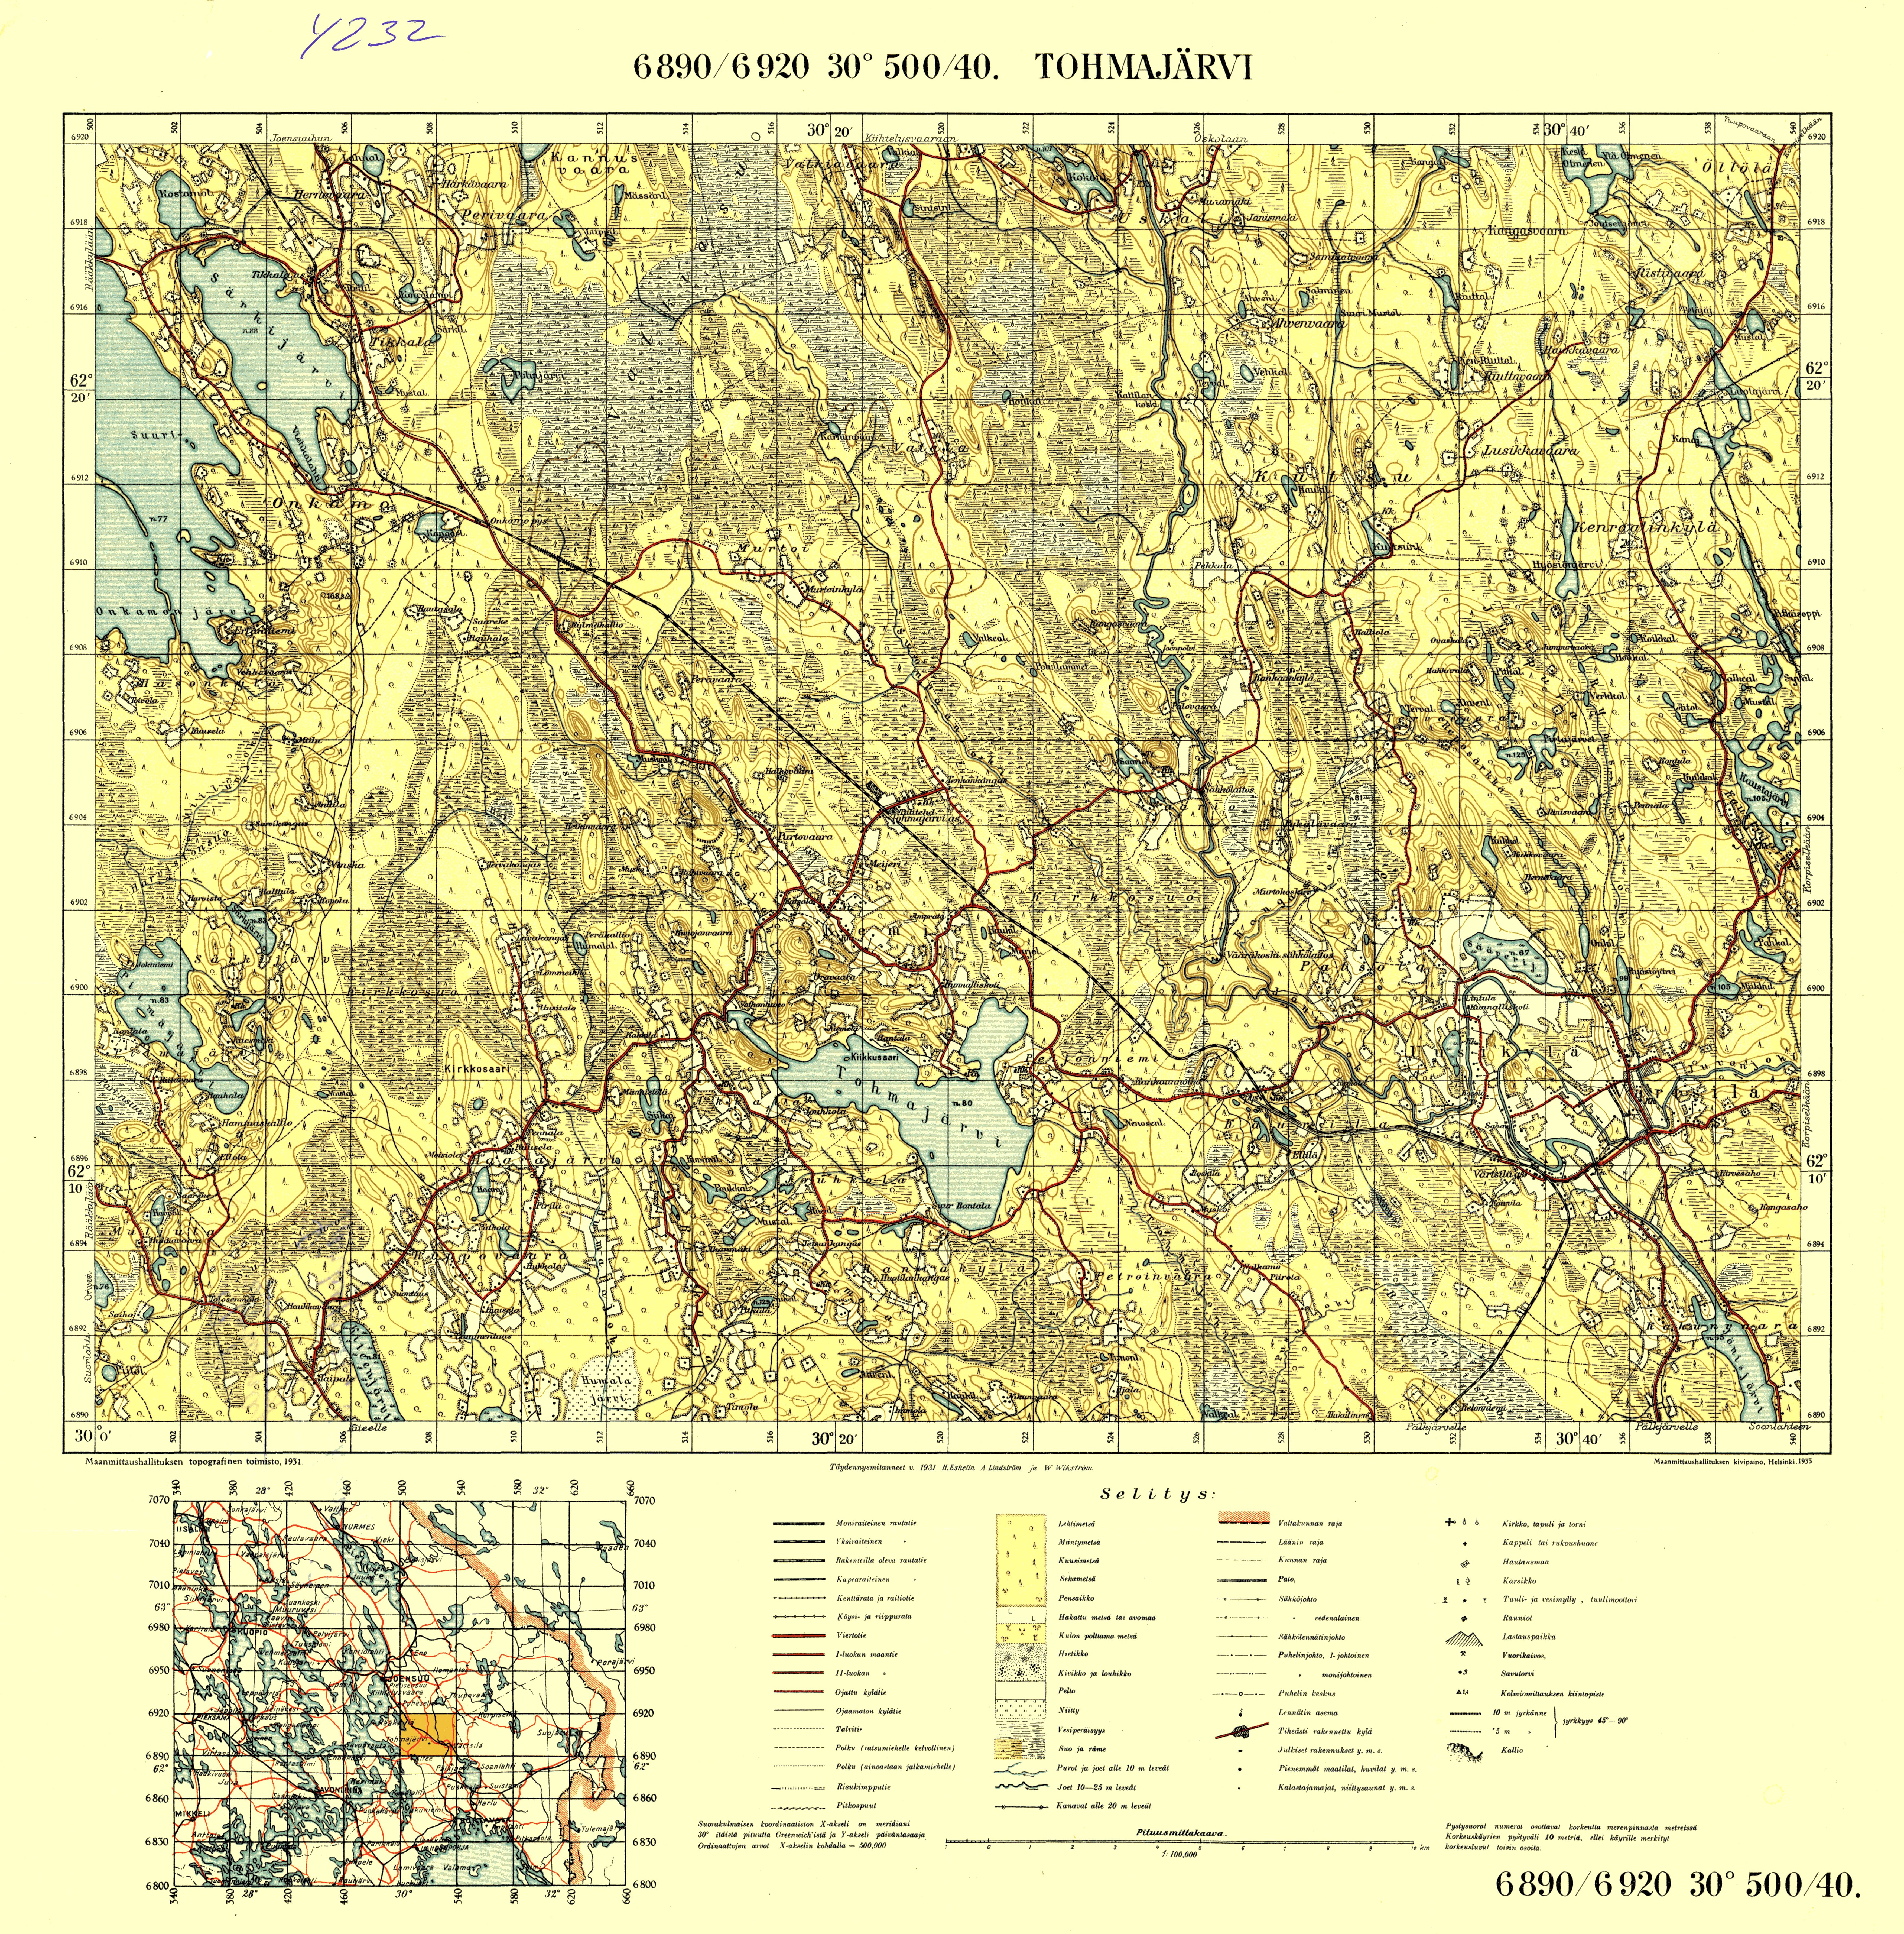 Tohmajärvi. Topografikartta 4232. Topographic map from 1933. Use the zooming tool to explore in higher level of detail. Obtain as a quality print or high resolution image